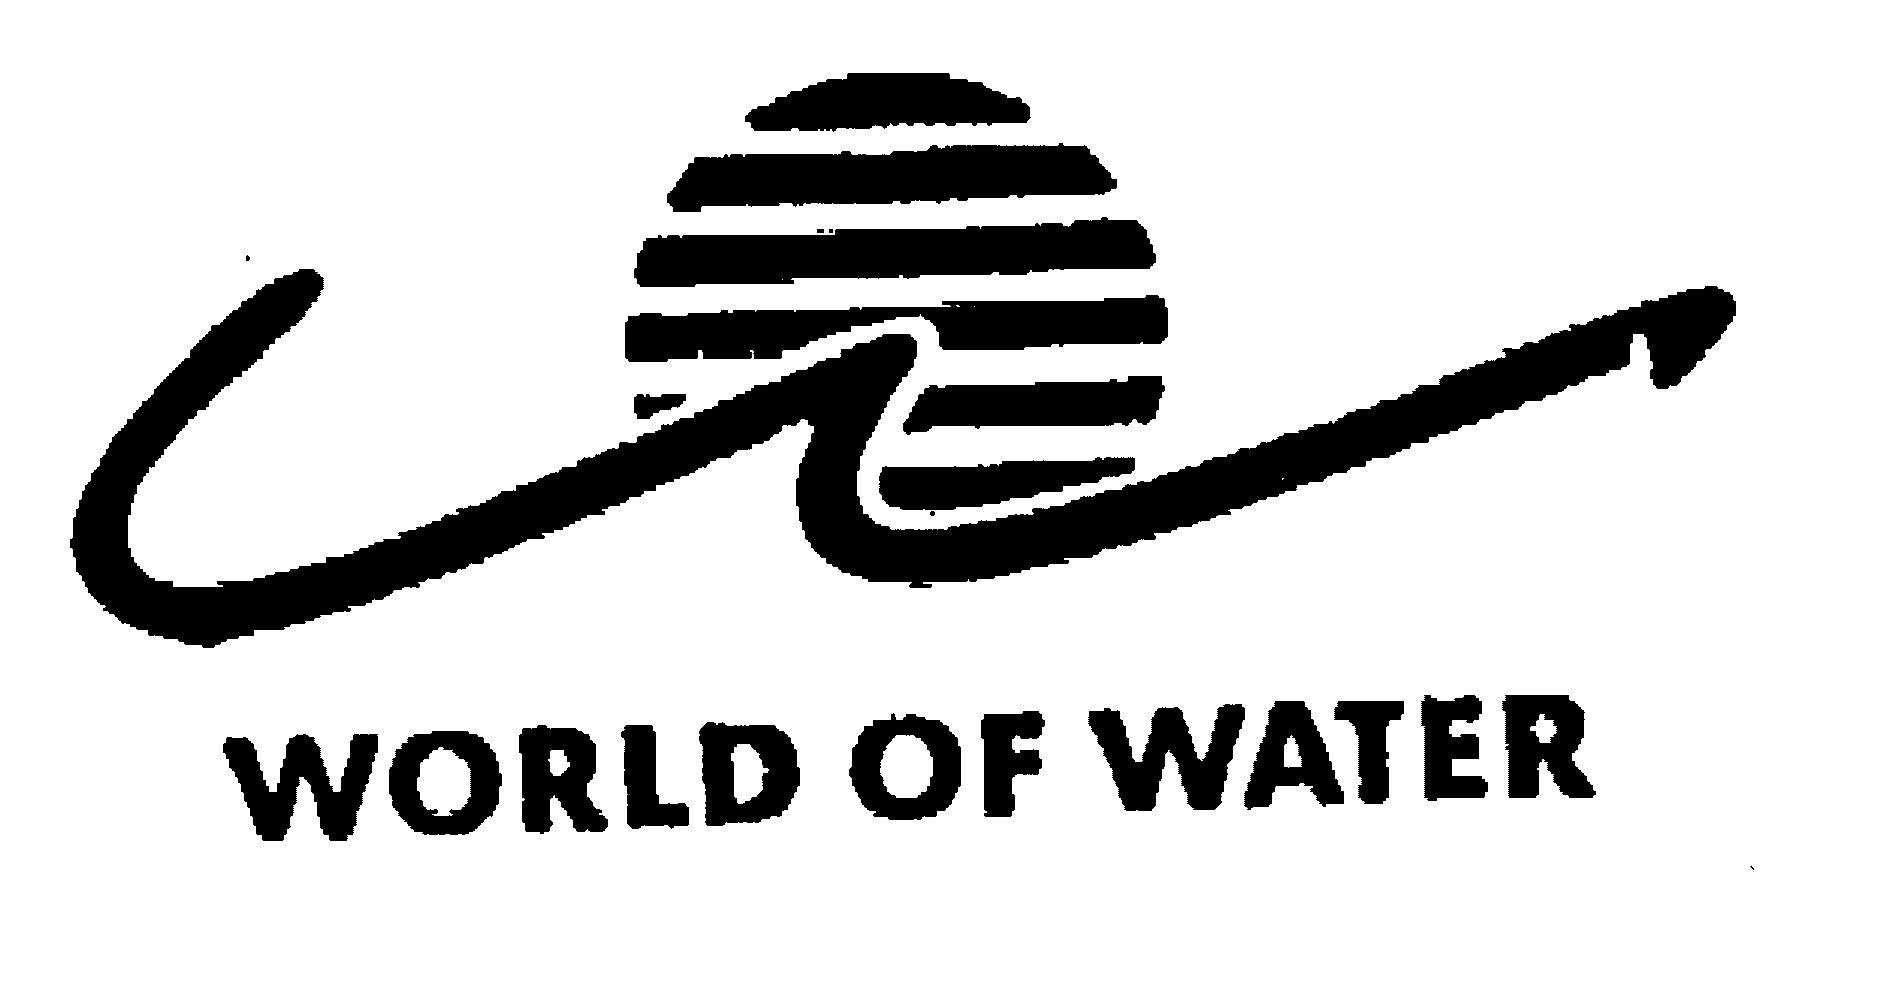  WORLD OF WATER